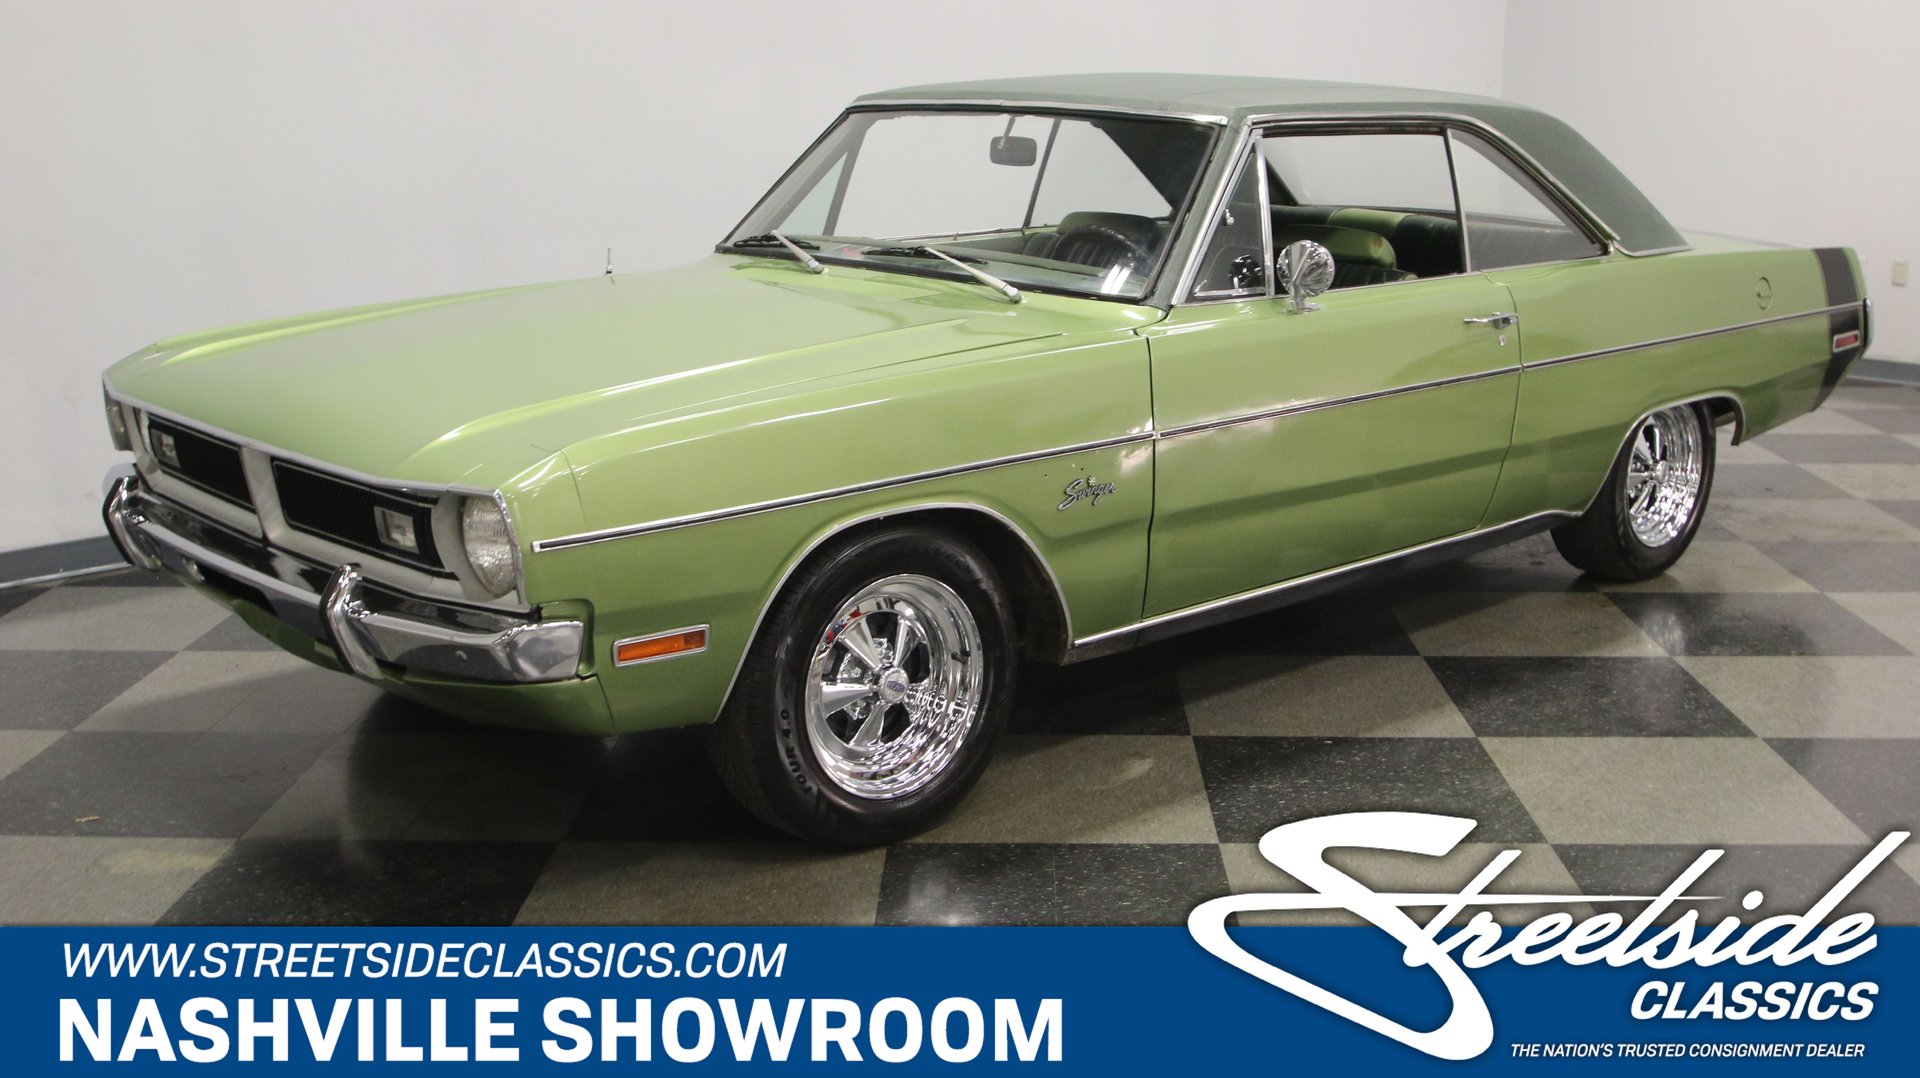 1971 Dodge Dart Classic Cars for Sale photo